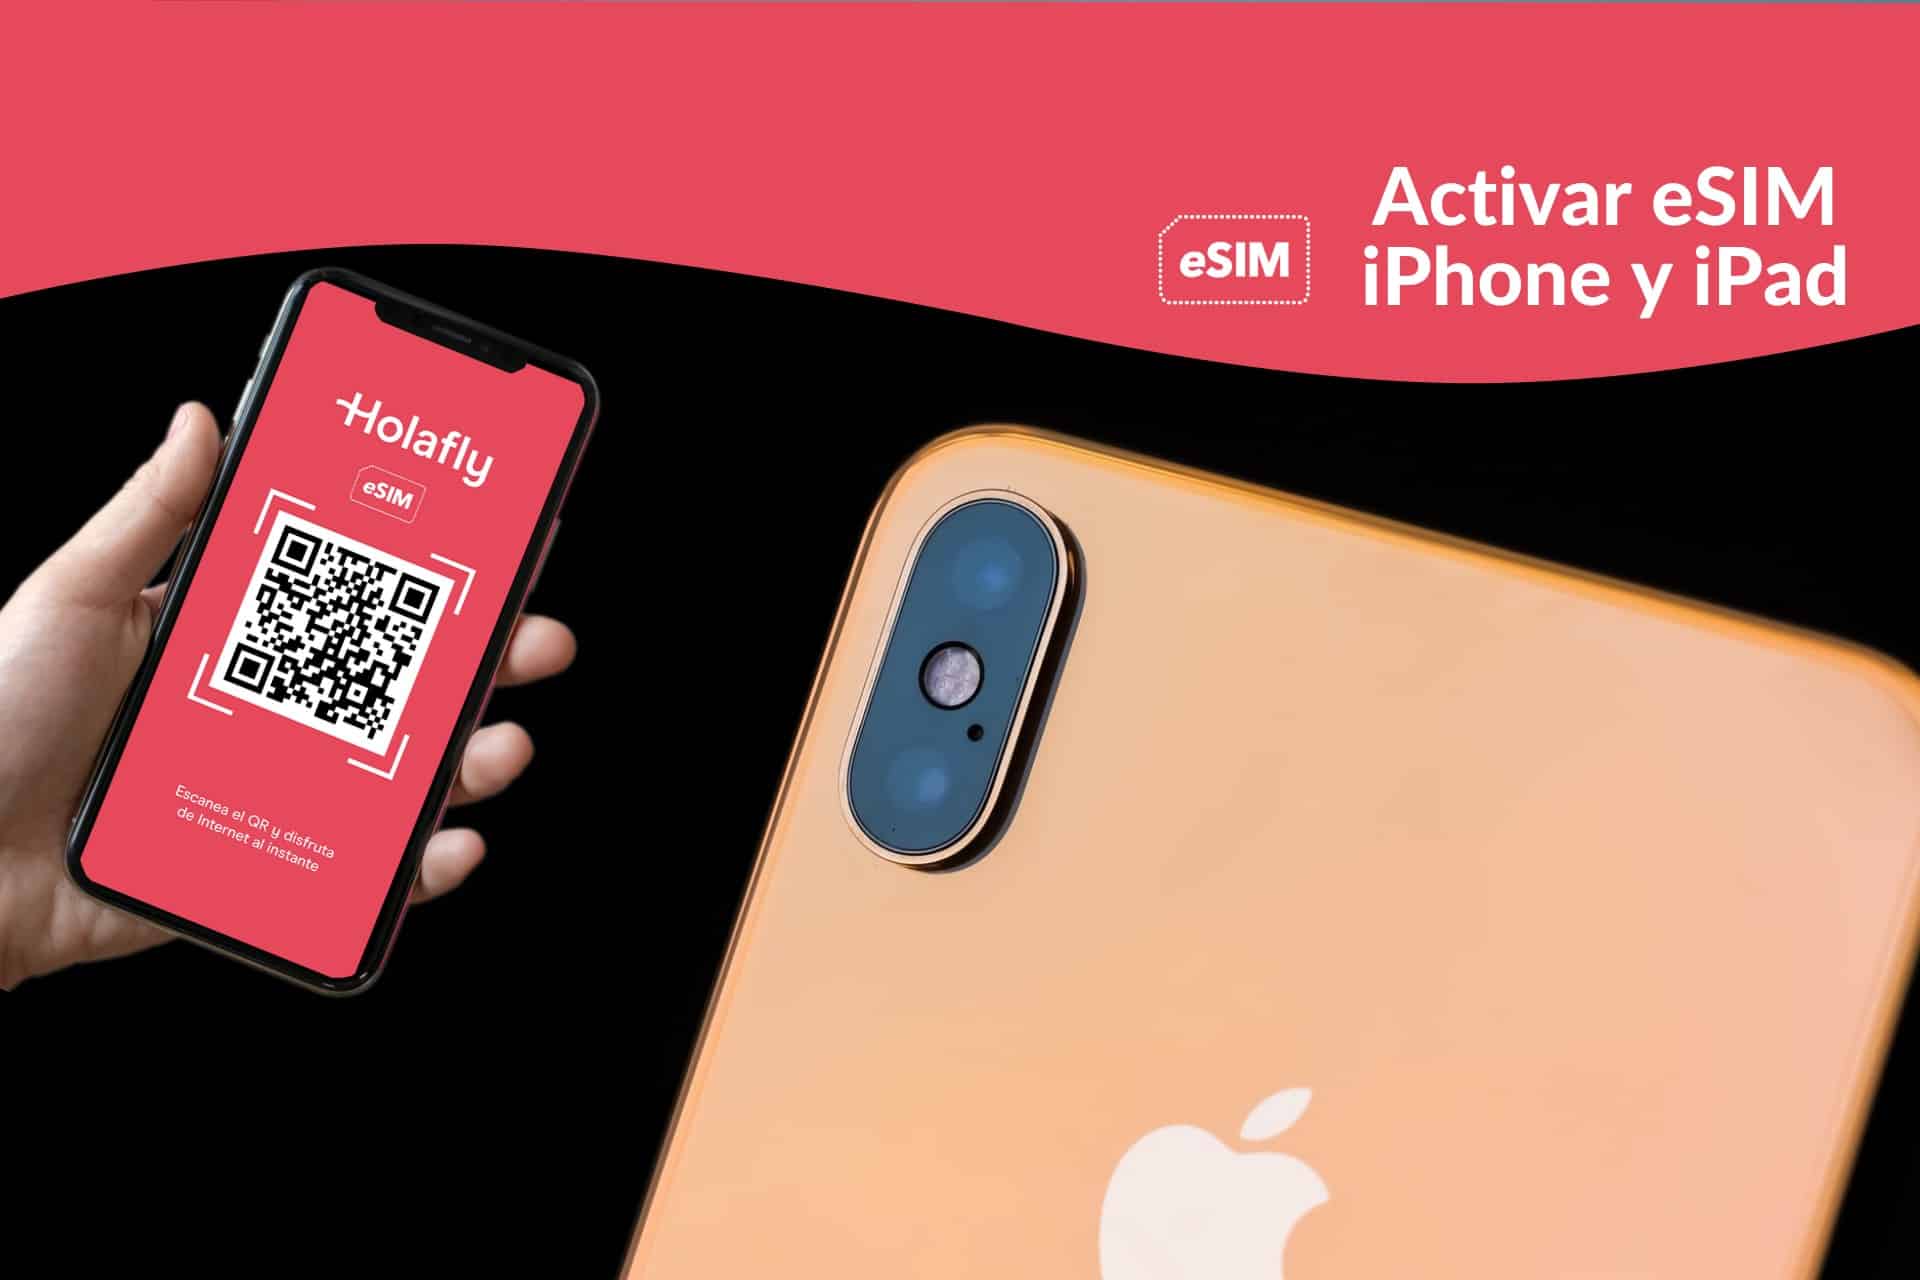 How to Activate Your Esim Service Holafly,  best Algeria esim, Algeria esim, Algeria esim unlimited data, unlimited data esim Algeria, best esim for Algeria, Algeria tourist esim, esim Algeria, Algeria esim, Algerian esim for tourist, Algeria esim for tourist, Algeria prepaid esim, Prepaid eSim in Algeria, cheapest esim in Algeria, best data plan esim Algeria, Airalo Algeria Esim, Holafly Algeria eSim, Nomad eSim Algeria, MTX Connect eSim Algeria, data eSim in Algeria, Airalo Algeria esim discount code, Holafly Algeria discount code, Nomad Algeria esim discount code, Ubigi Algeria esim discount code, Ubigi Algeria esim 